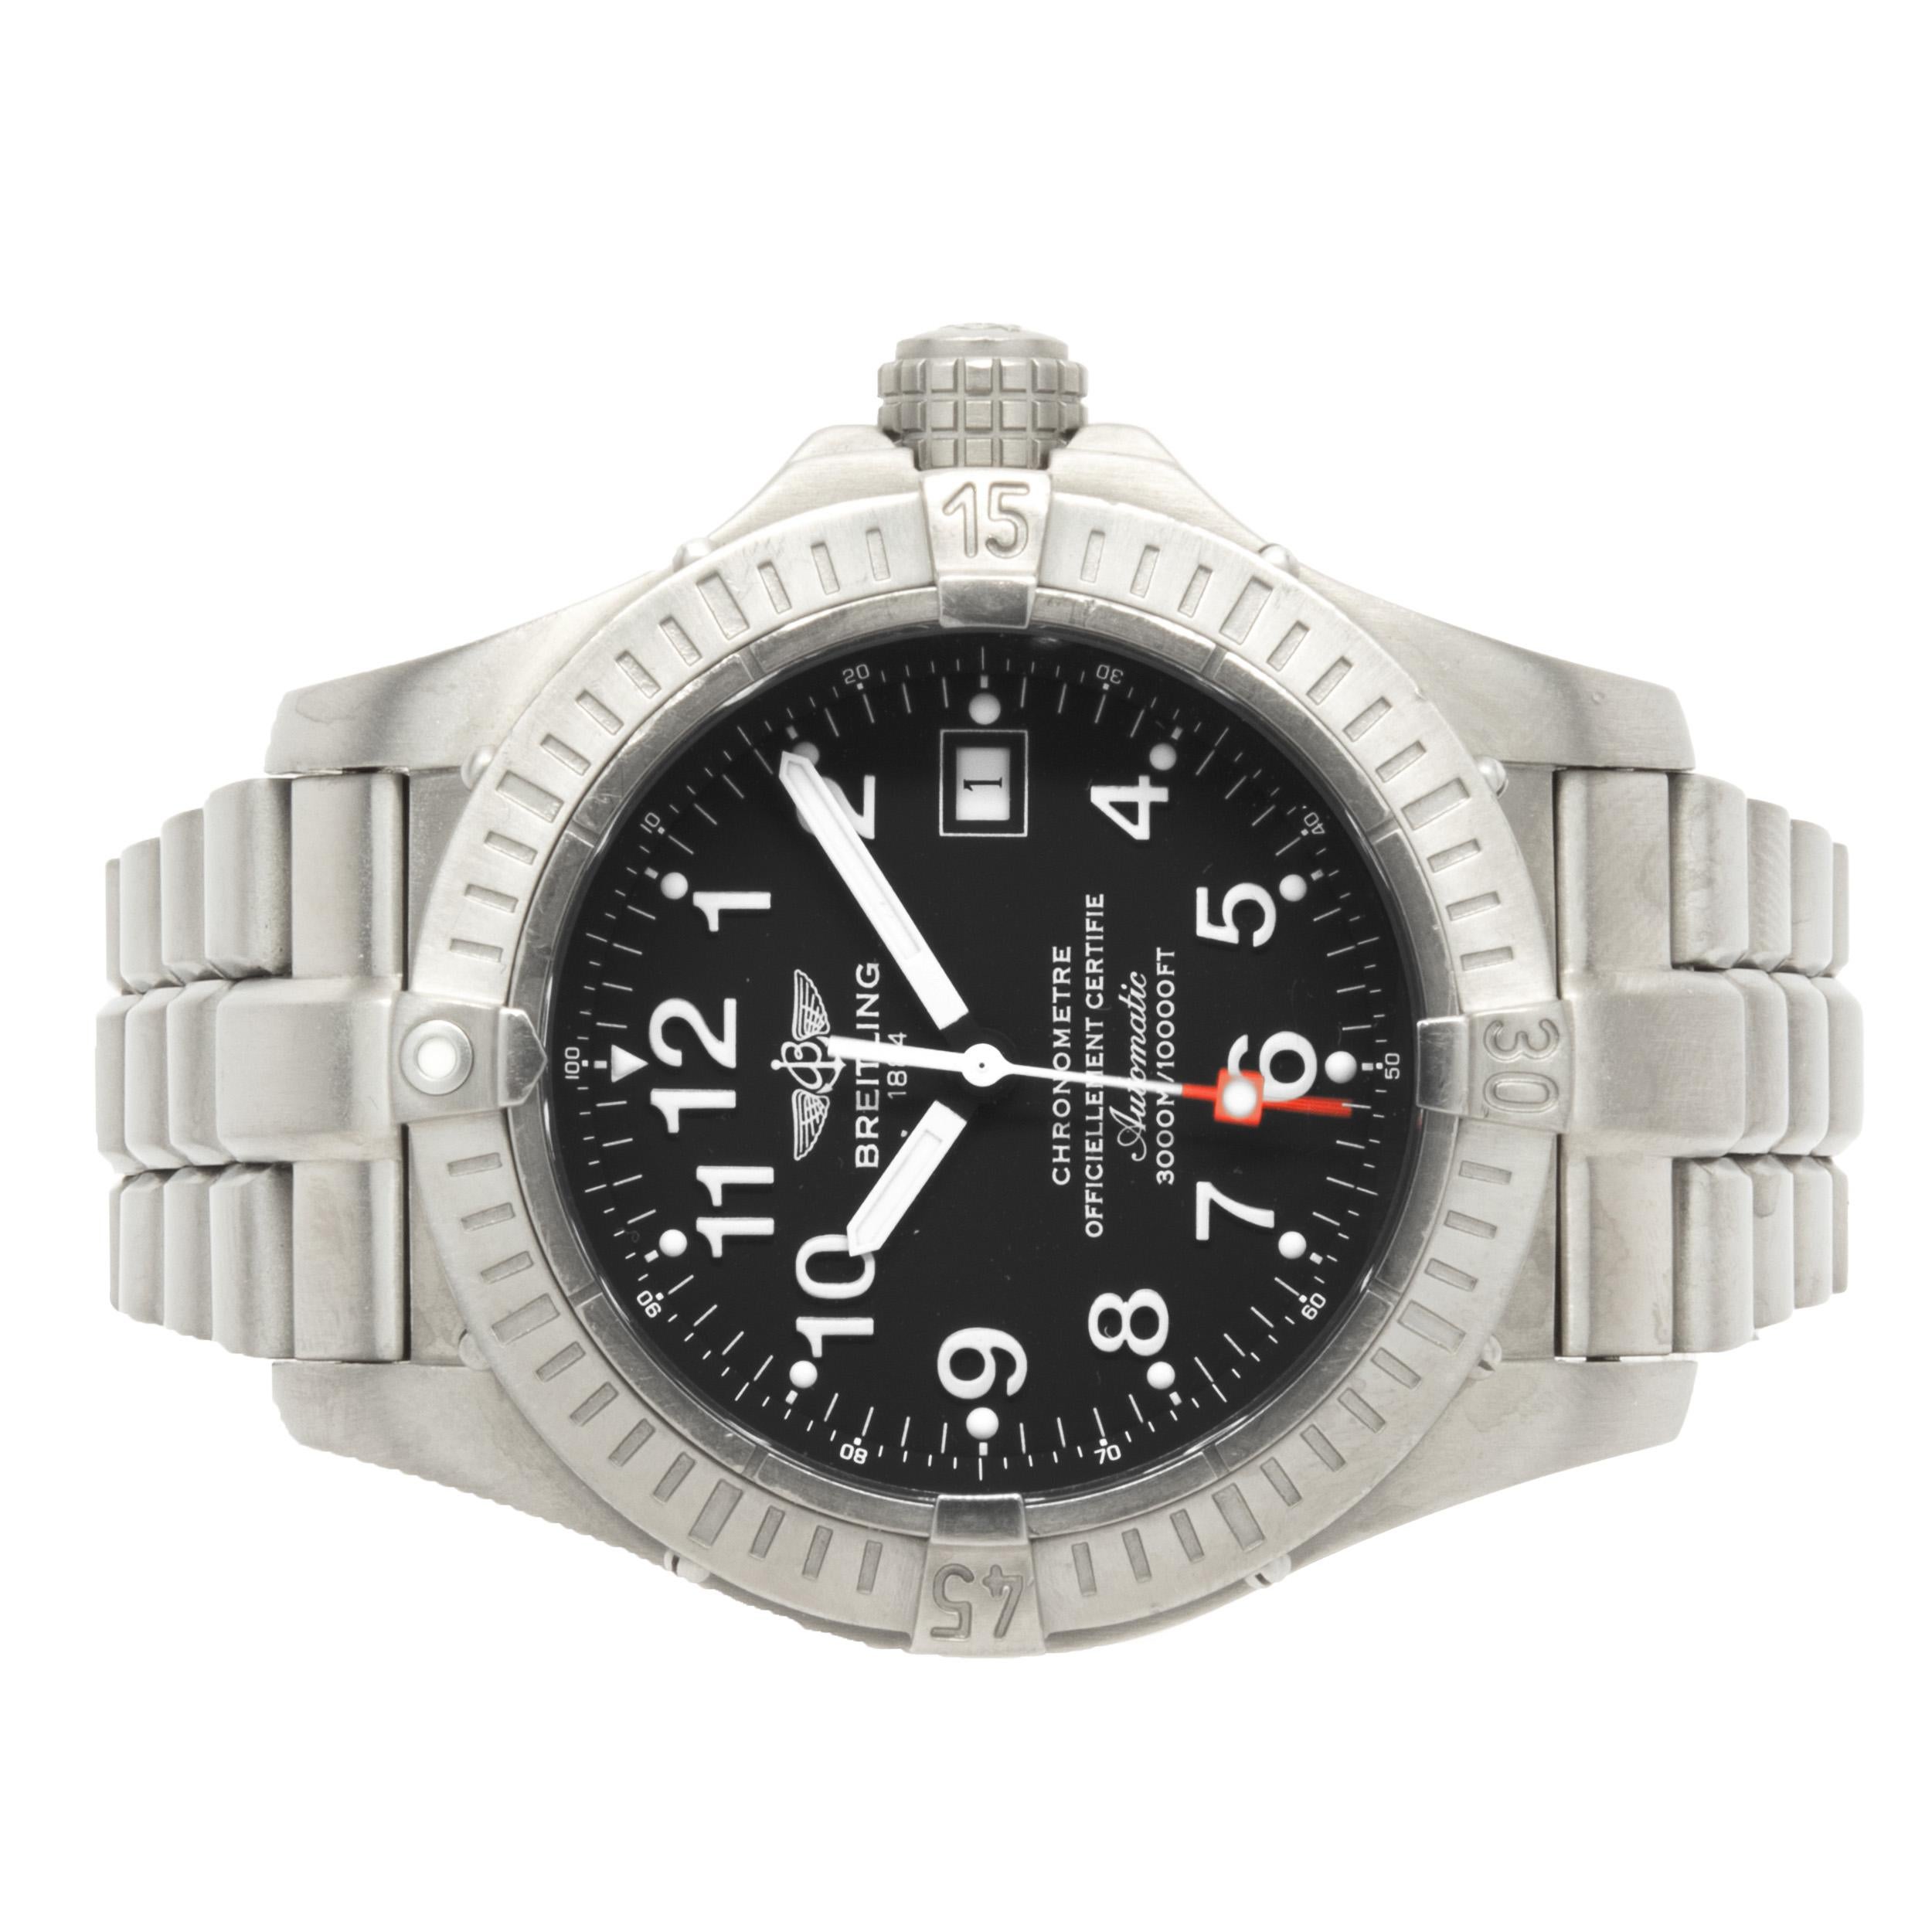 Movement: automatic
Function: hours, minutes, seconds, date
Case: round 44mm titanium case, uni-directional rotating timing bezel, sapphire protective crystal, Breitling engraved case-back, screw-down crown, water resistant to 100 meters
Band: